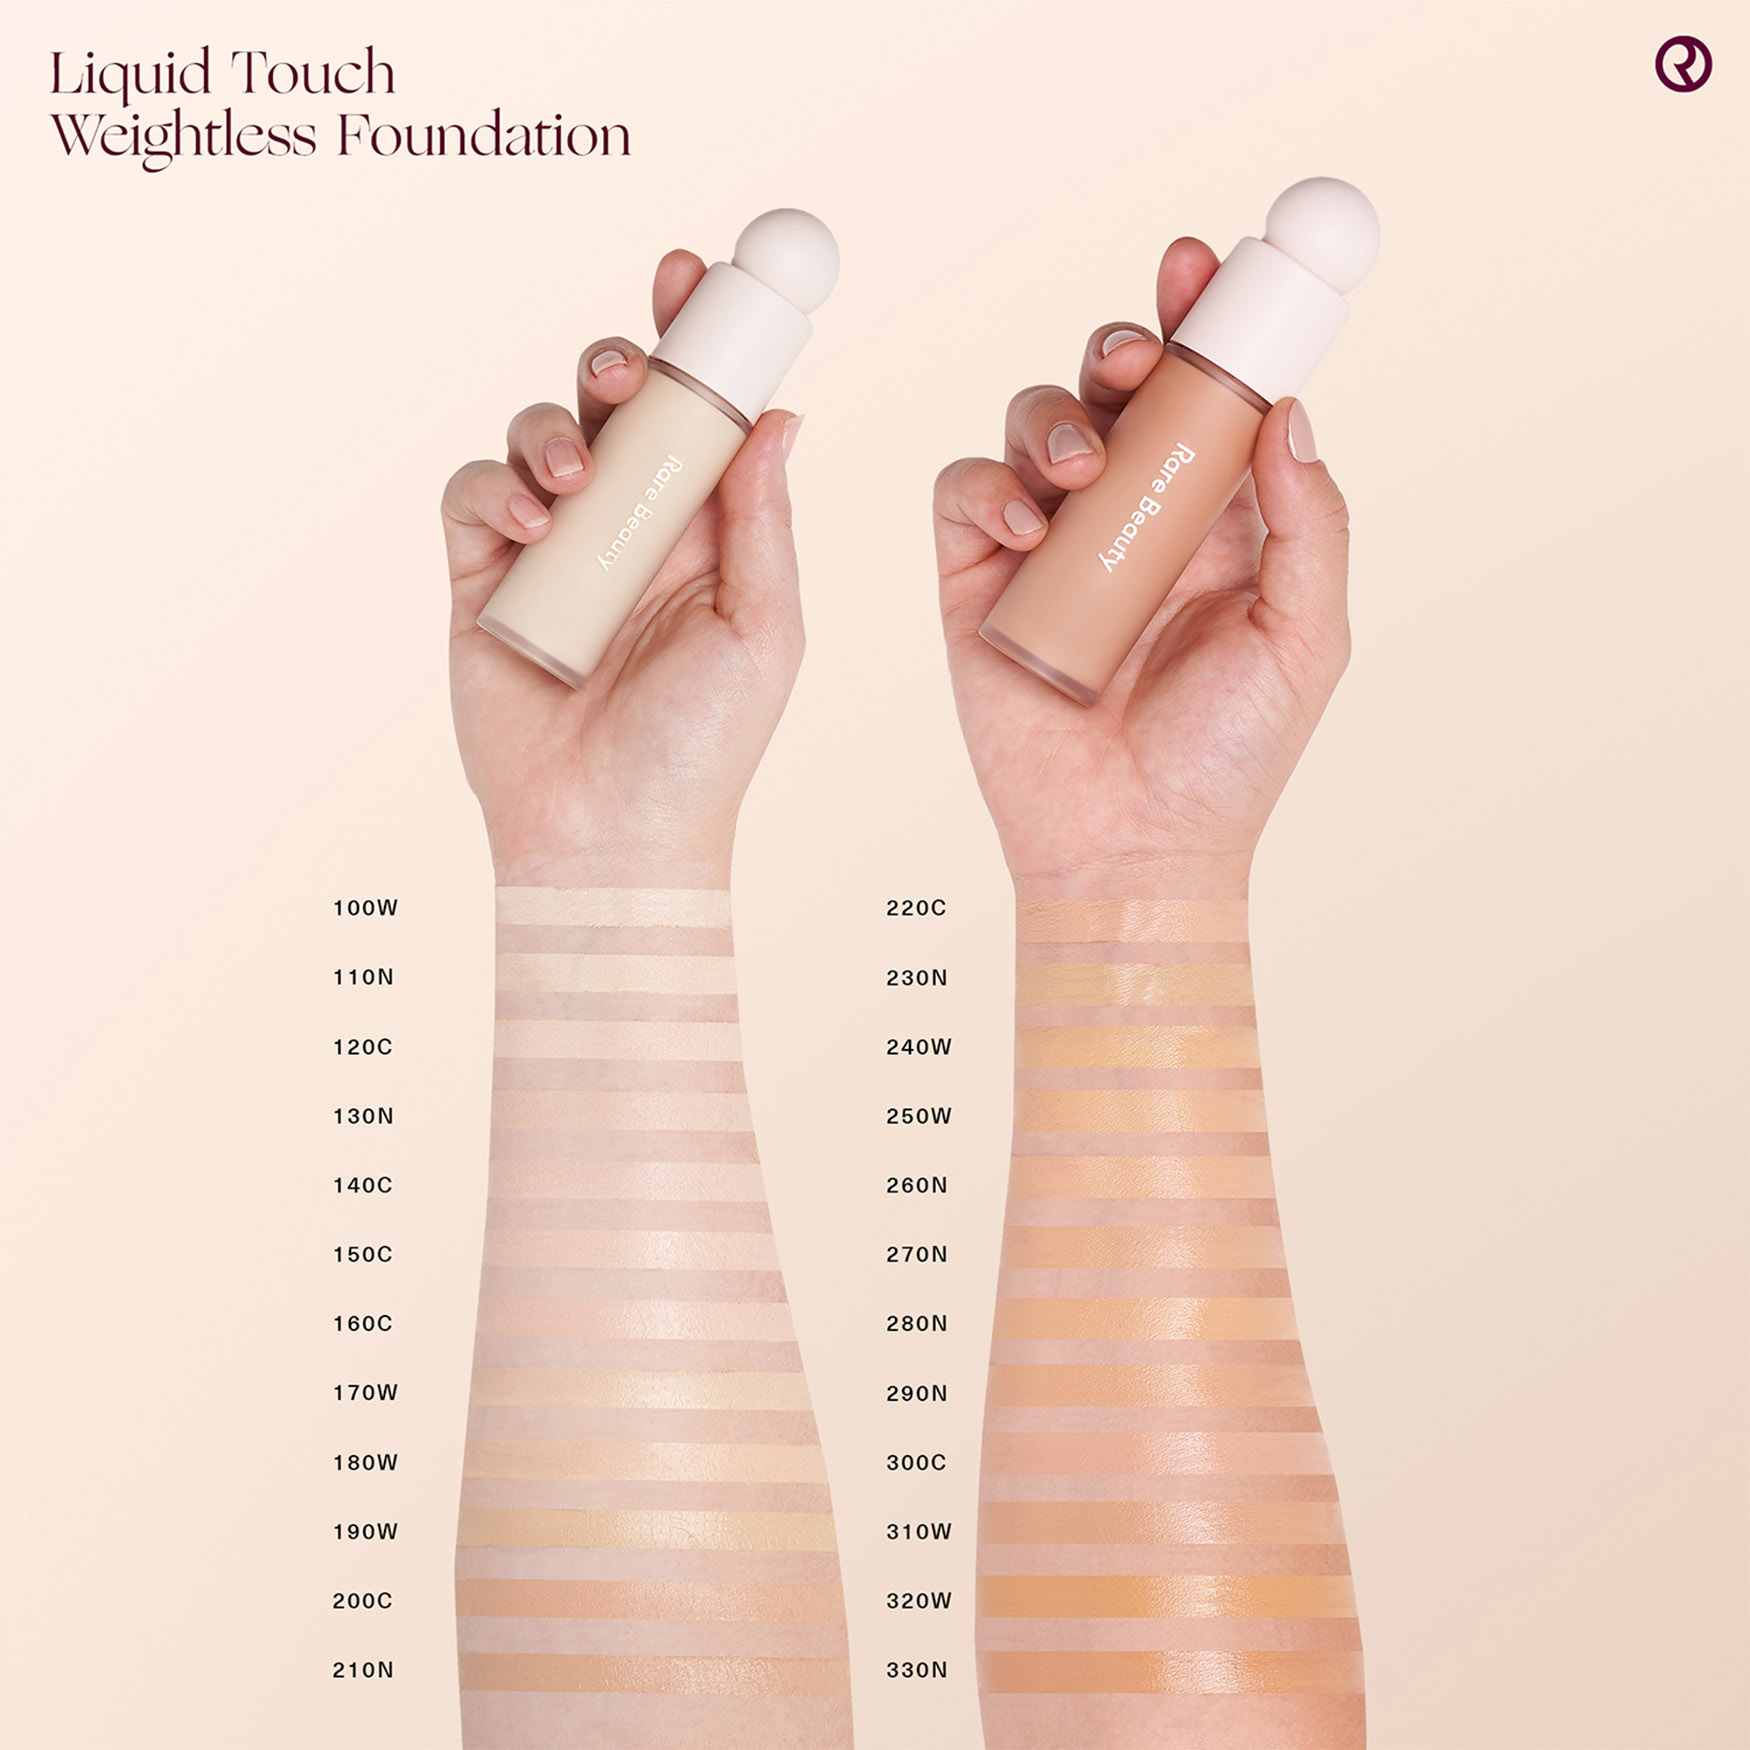 Rare Beauty Liquid Touch Weightless Foundation | Space NK